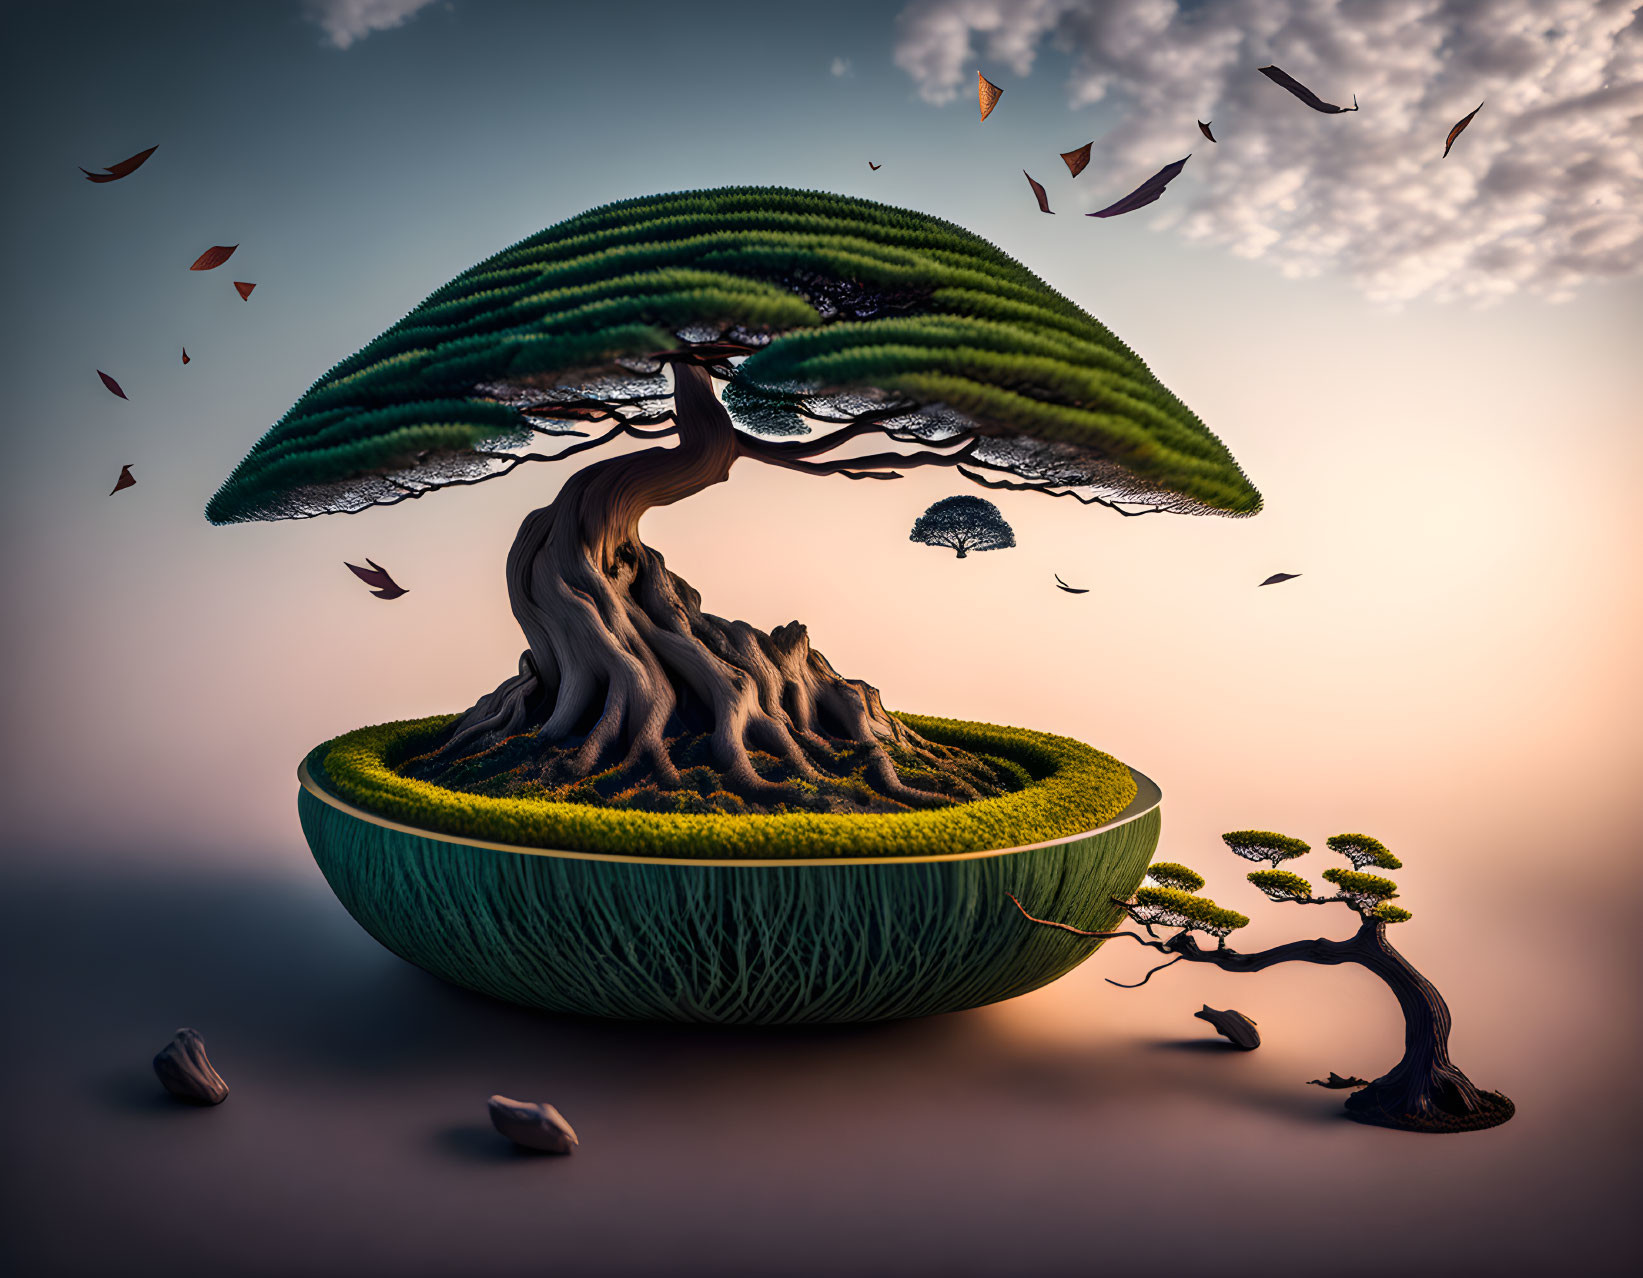 Whimsical tree with umbrella canopy on floating island at sunset